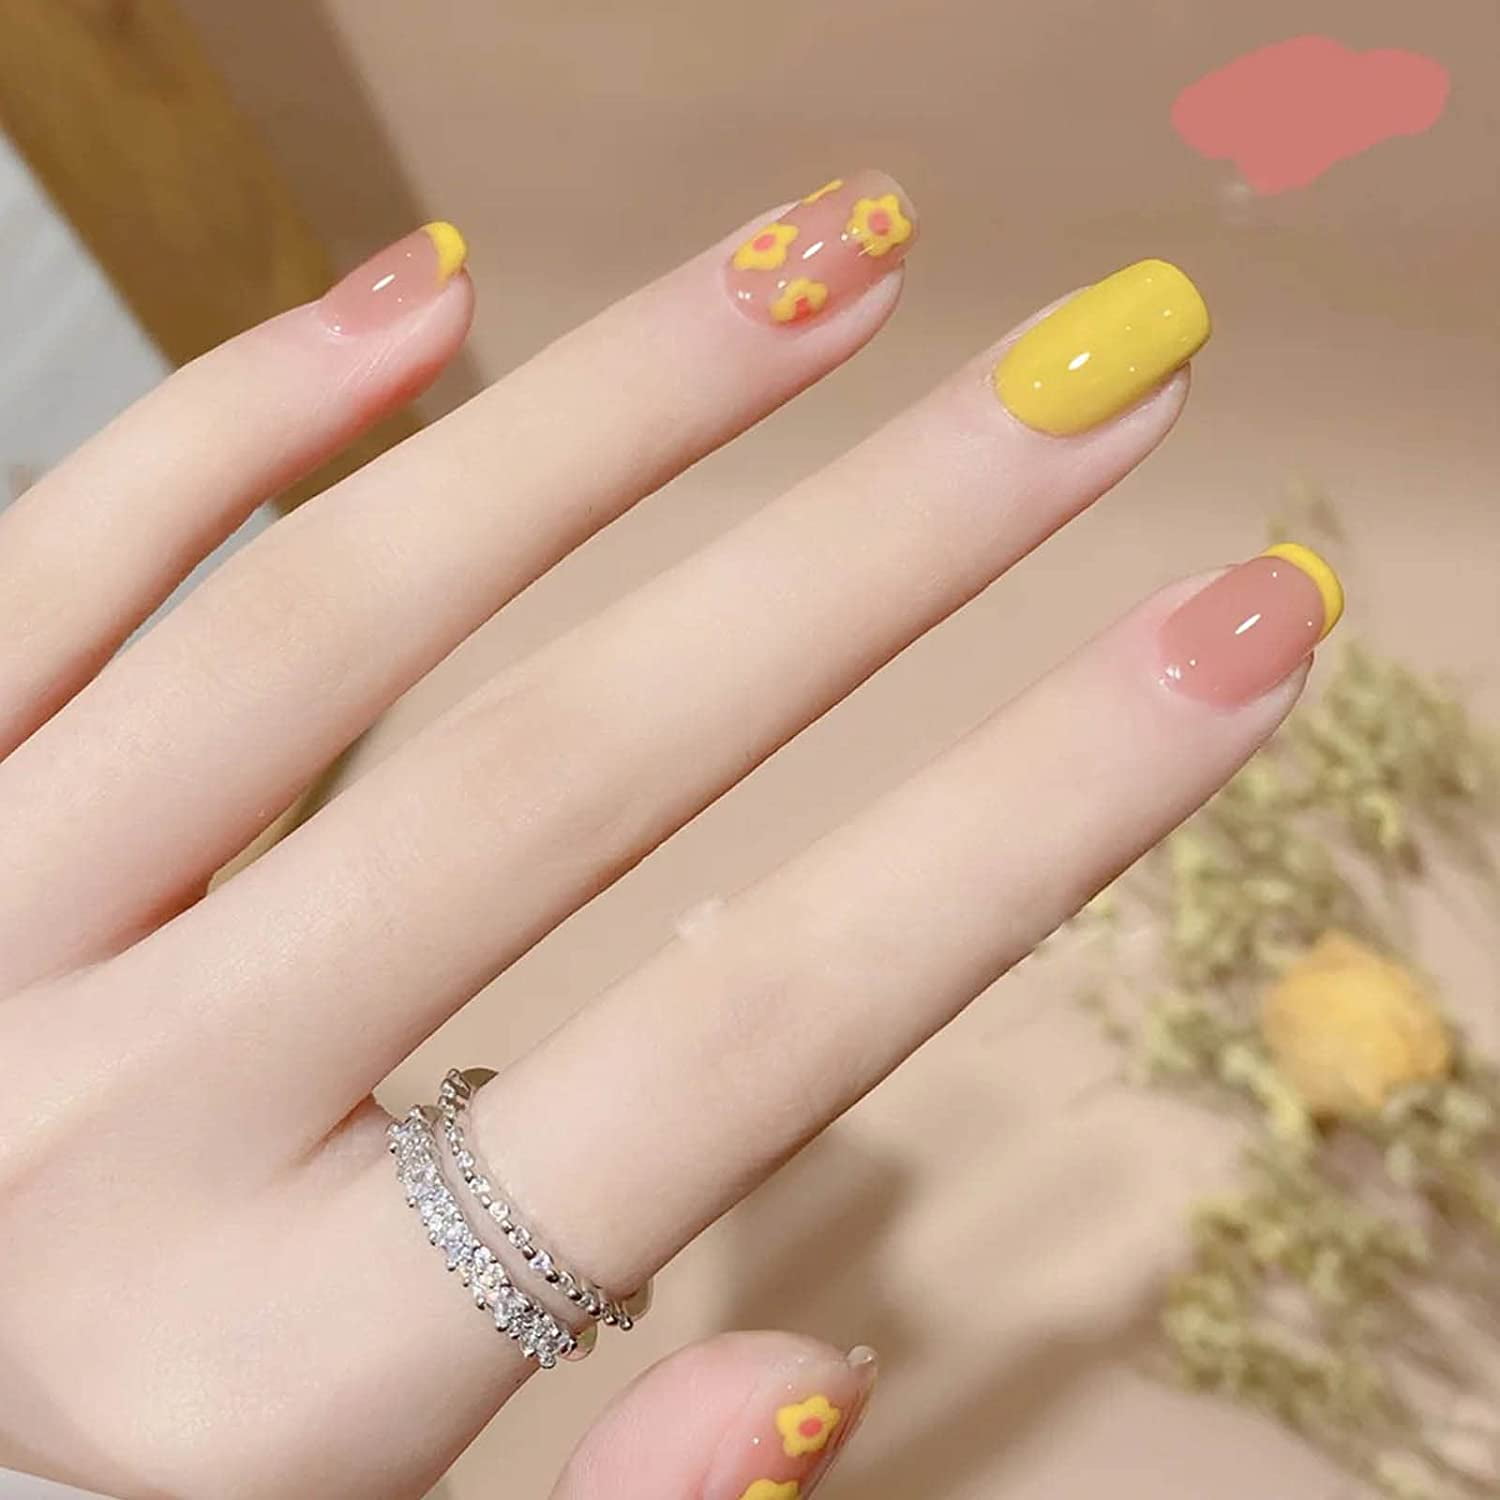 24PCS Short Square Press On Nails With Designs Cute,Yellow Acrylic Press On  Nails,Full Cover Short Fake Nails Square Press On Nails With Nail Adhesive  Tabs For Nail Art Salon DIY - Walmart.com